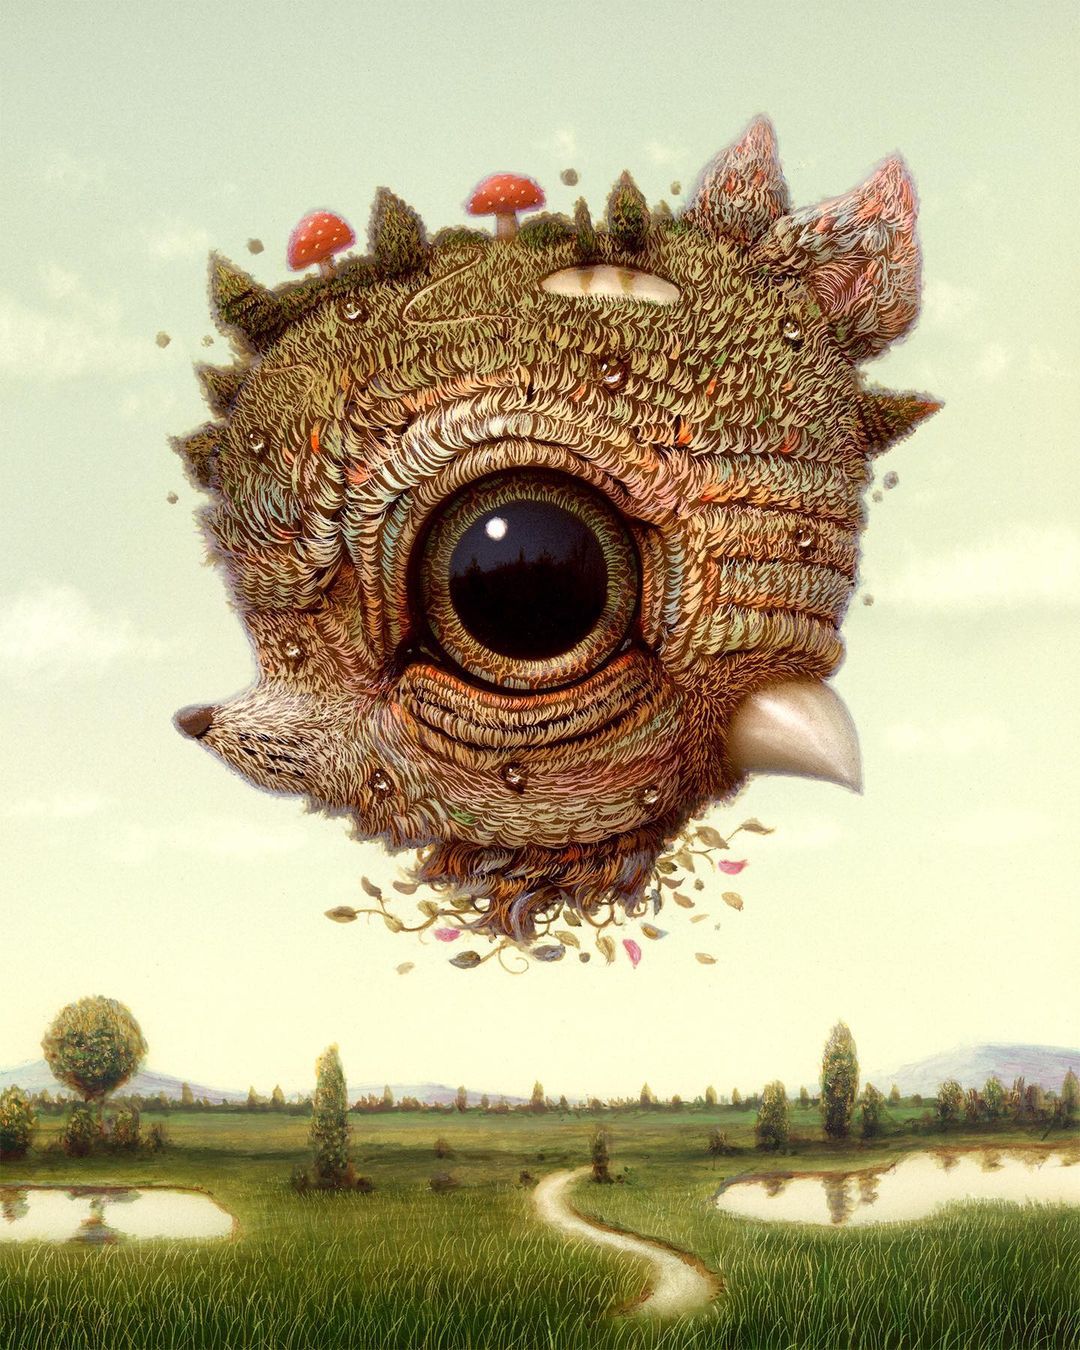 Quirky Fantastical Creatures With Oversized Eyes By Haoto Nattori 16